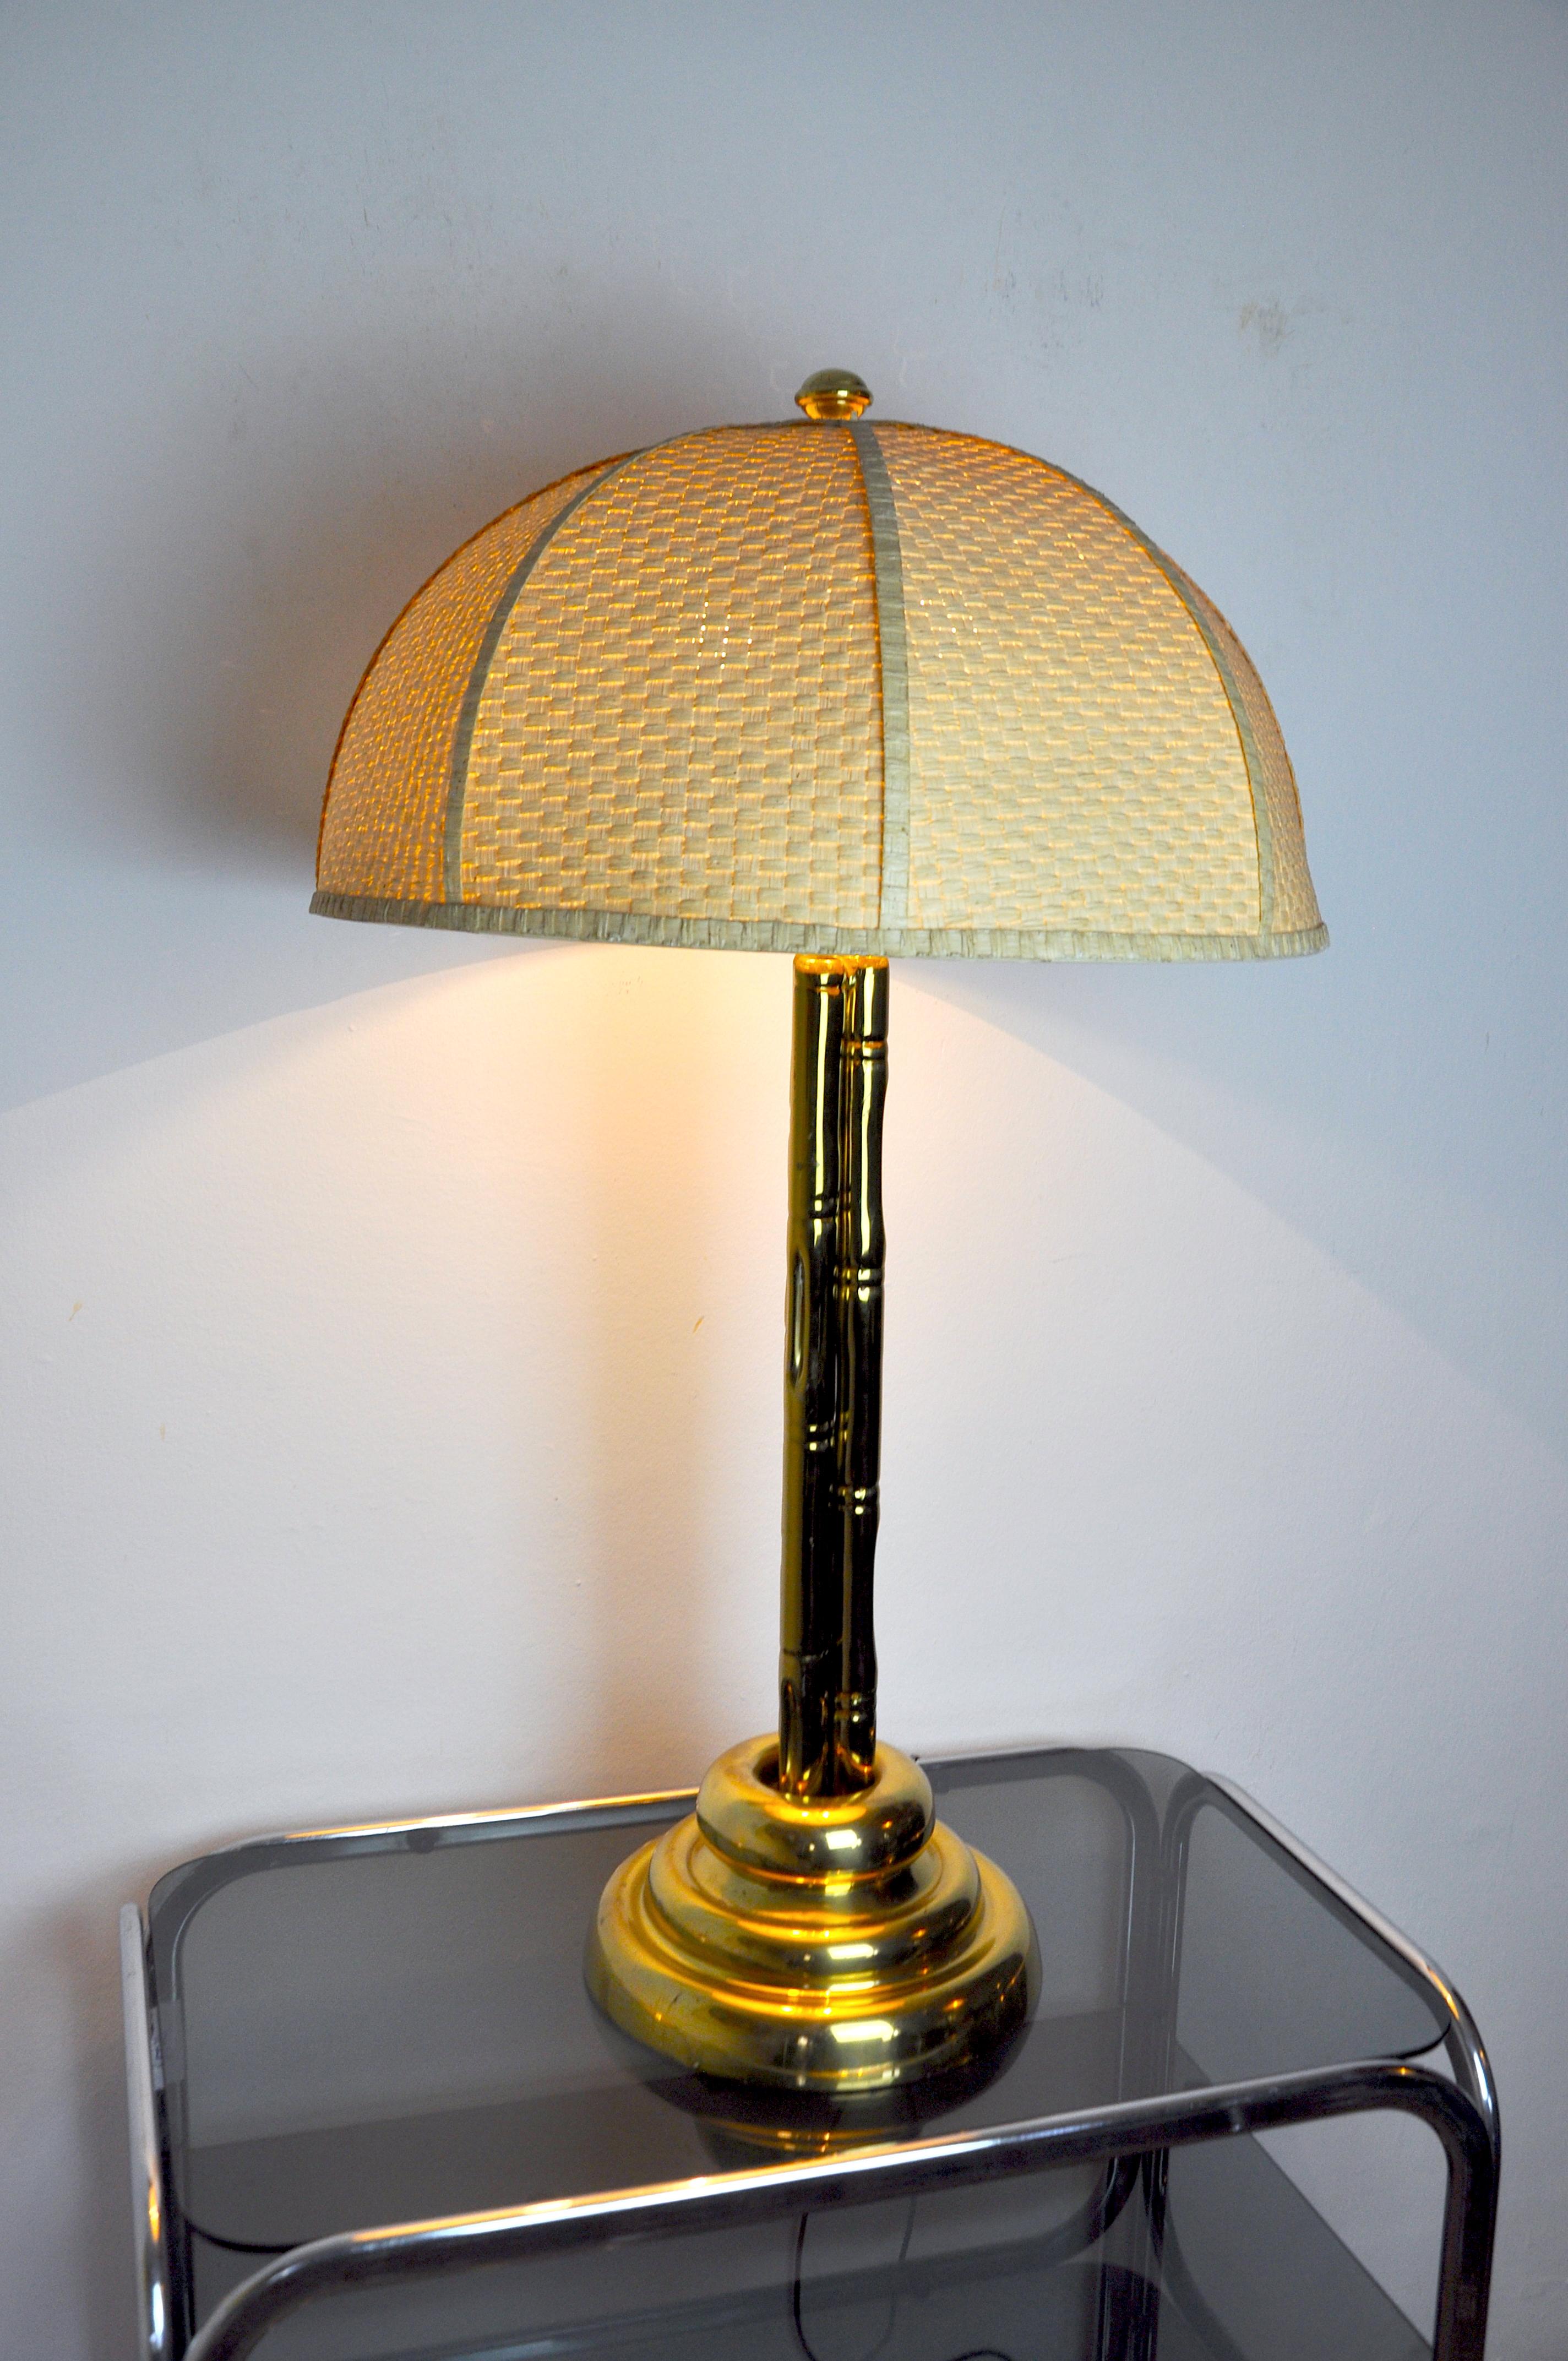 Superb and rare brass table lamp imitating bamboo. Rattan lampshade. Superb design product made in France in the 1970s in the style of Maison Bagues and Maison Jansen. This design object will illuminate your interior wonderfully. Electricity